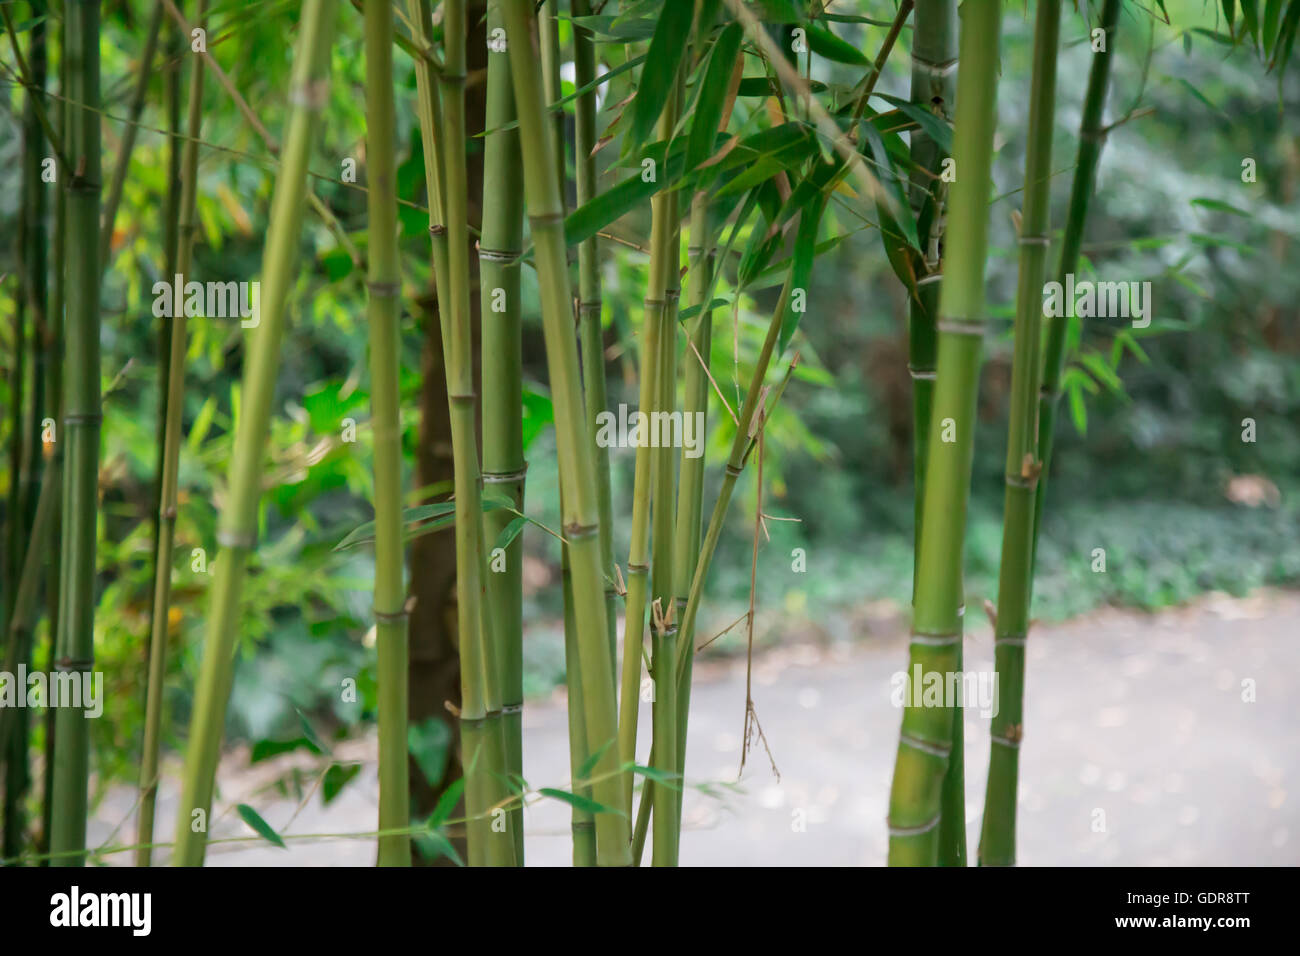 Green bamboo canes Stock Photo - Alamy